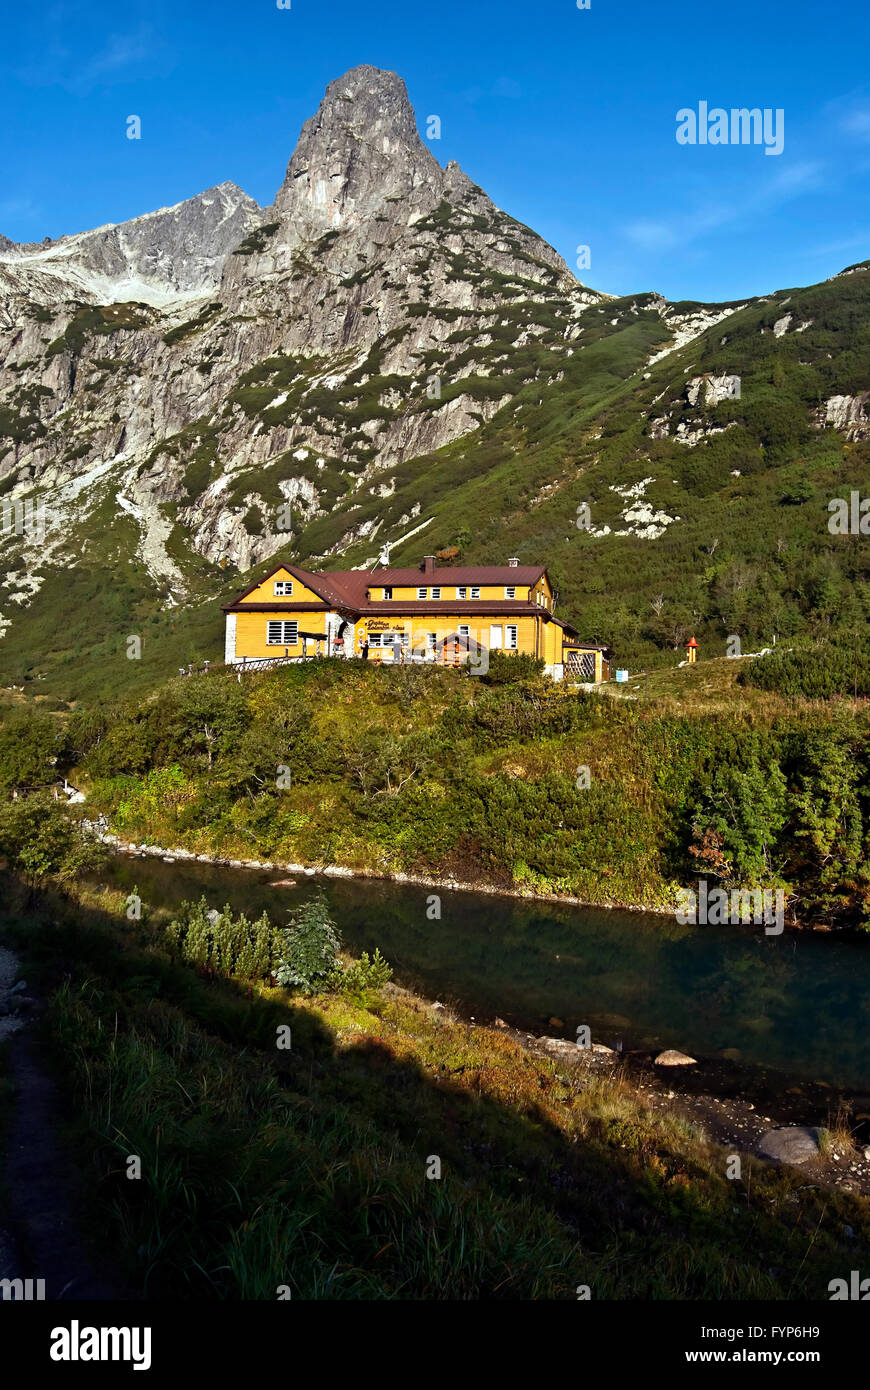 Chata pri Zelenom plese chalet with Jastrabia veza and Kolovy stit peaks in summer High Tatras mountains with clear sky Stock Photo